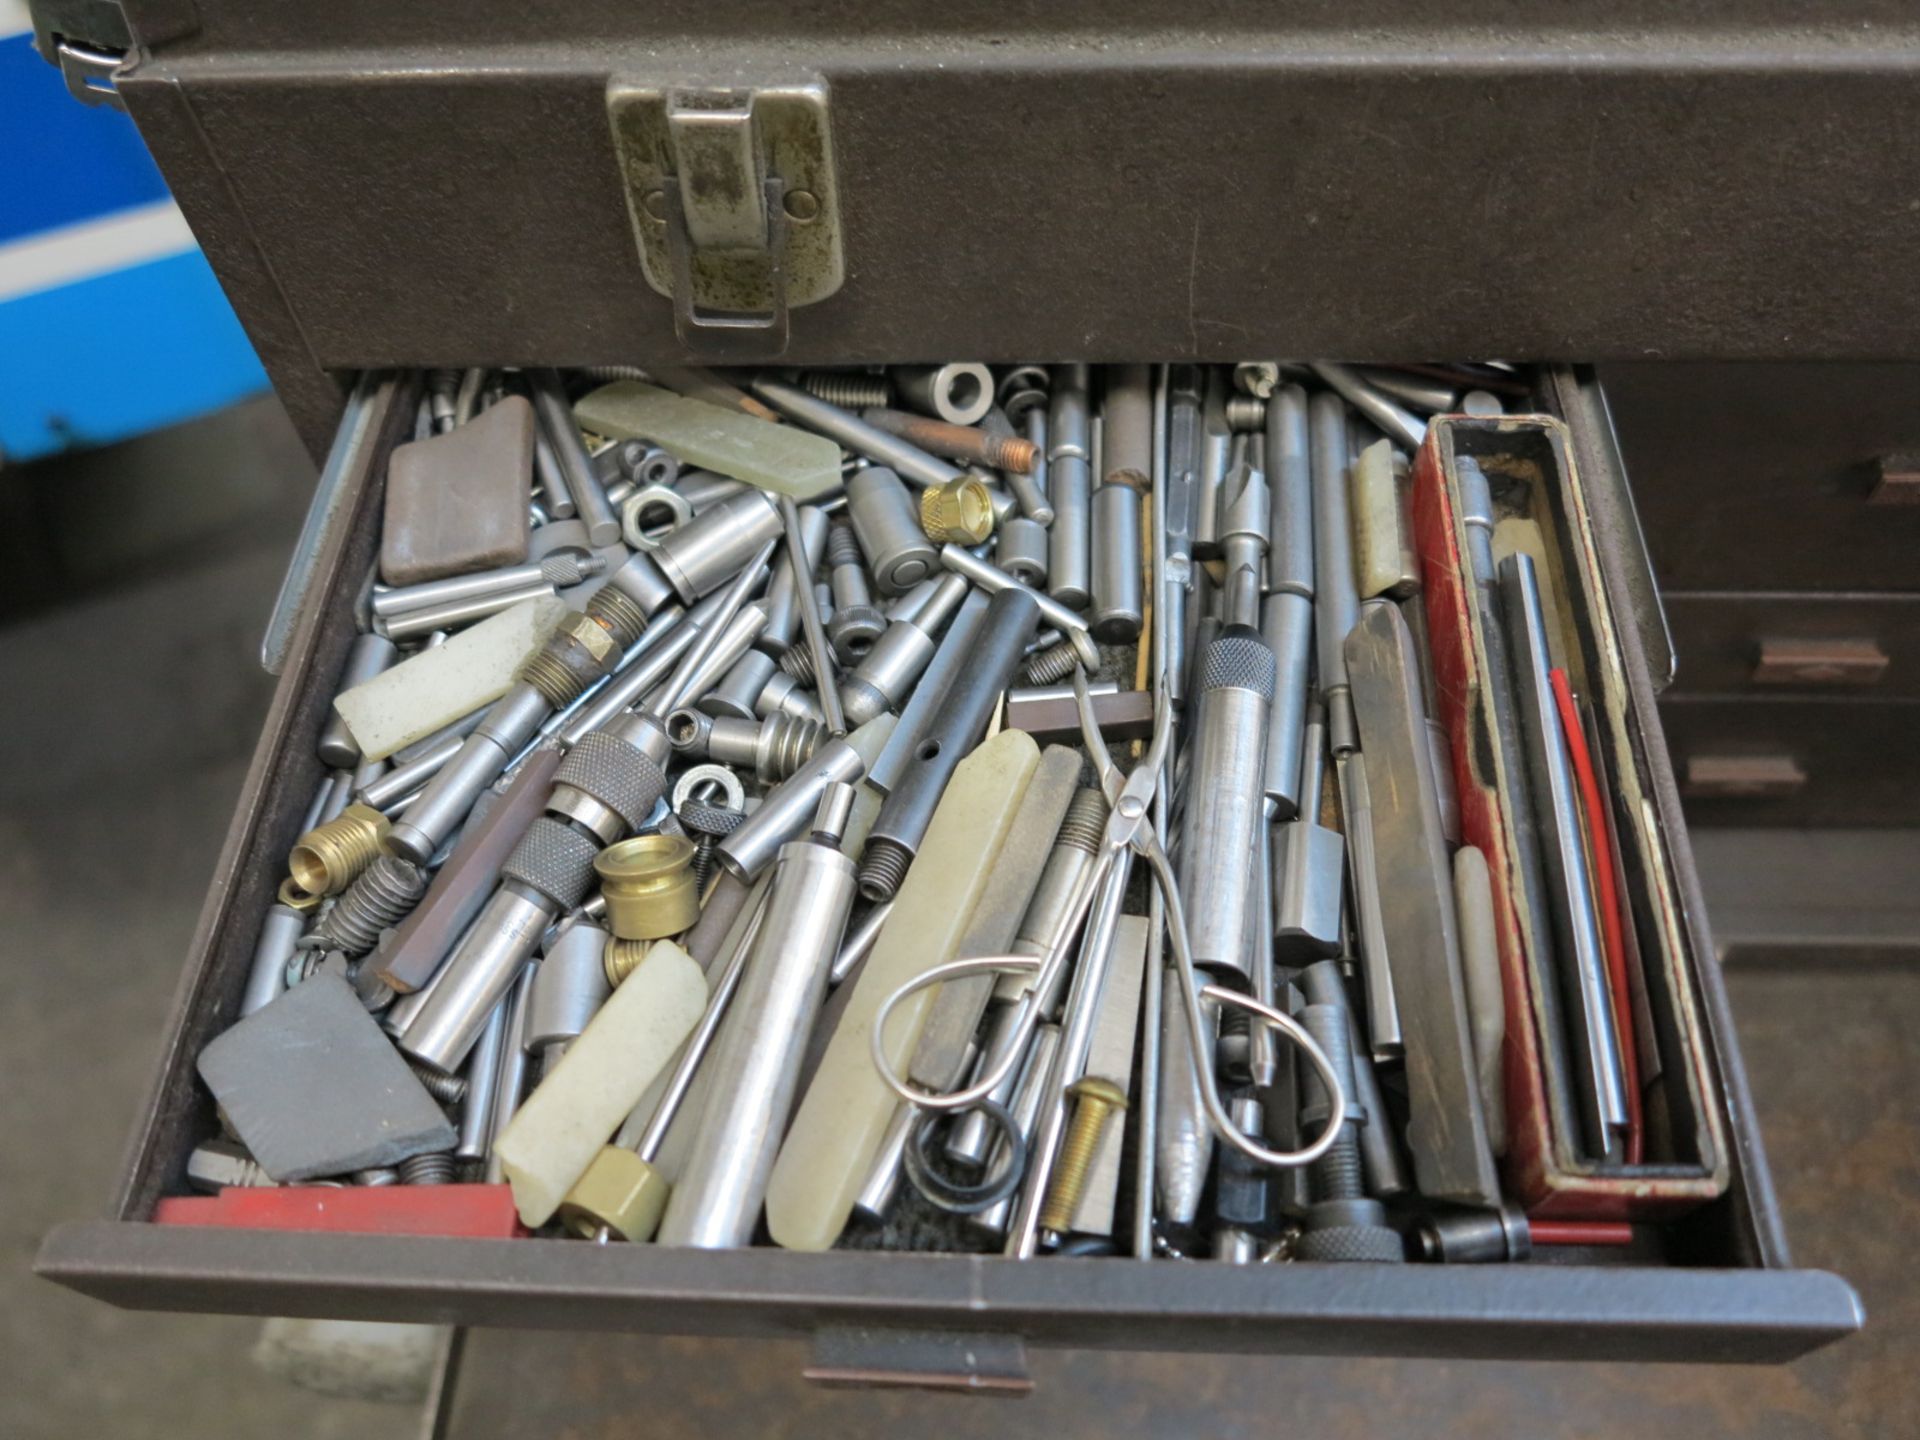 KENNEDY TOP BOX, FULL OF MACHINIST HAND TOOLS - Image 4 of 10